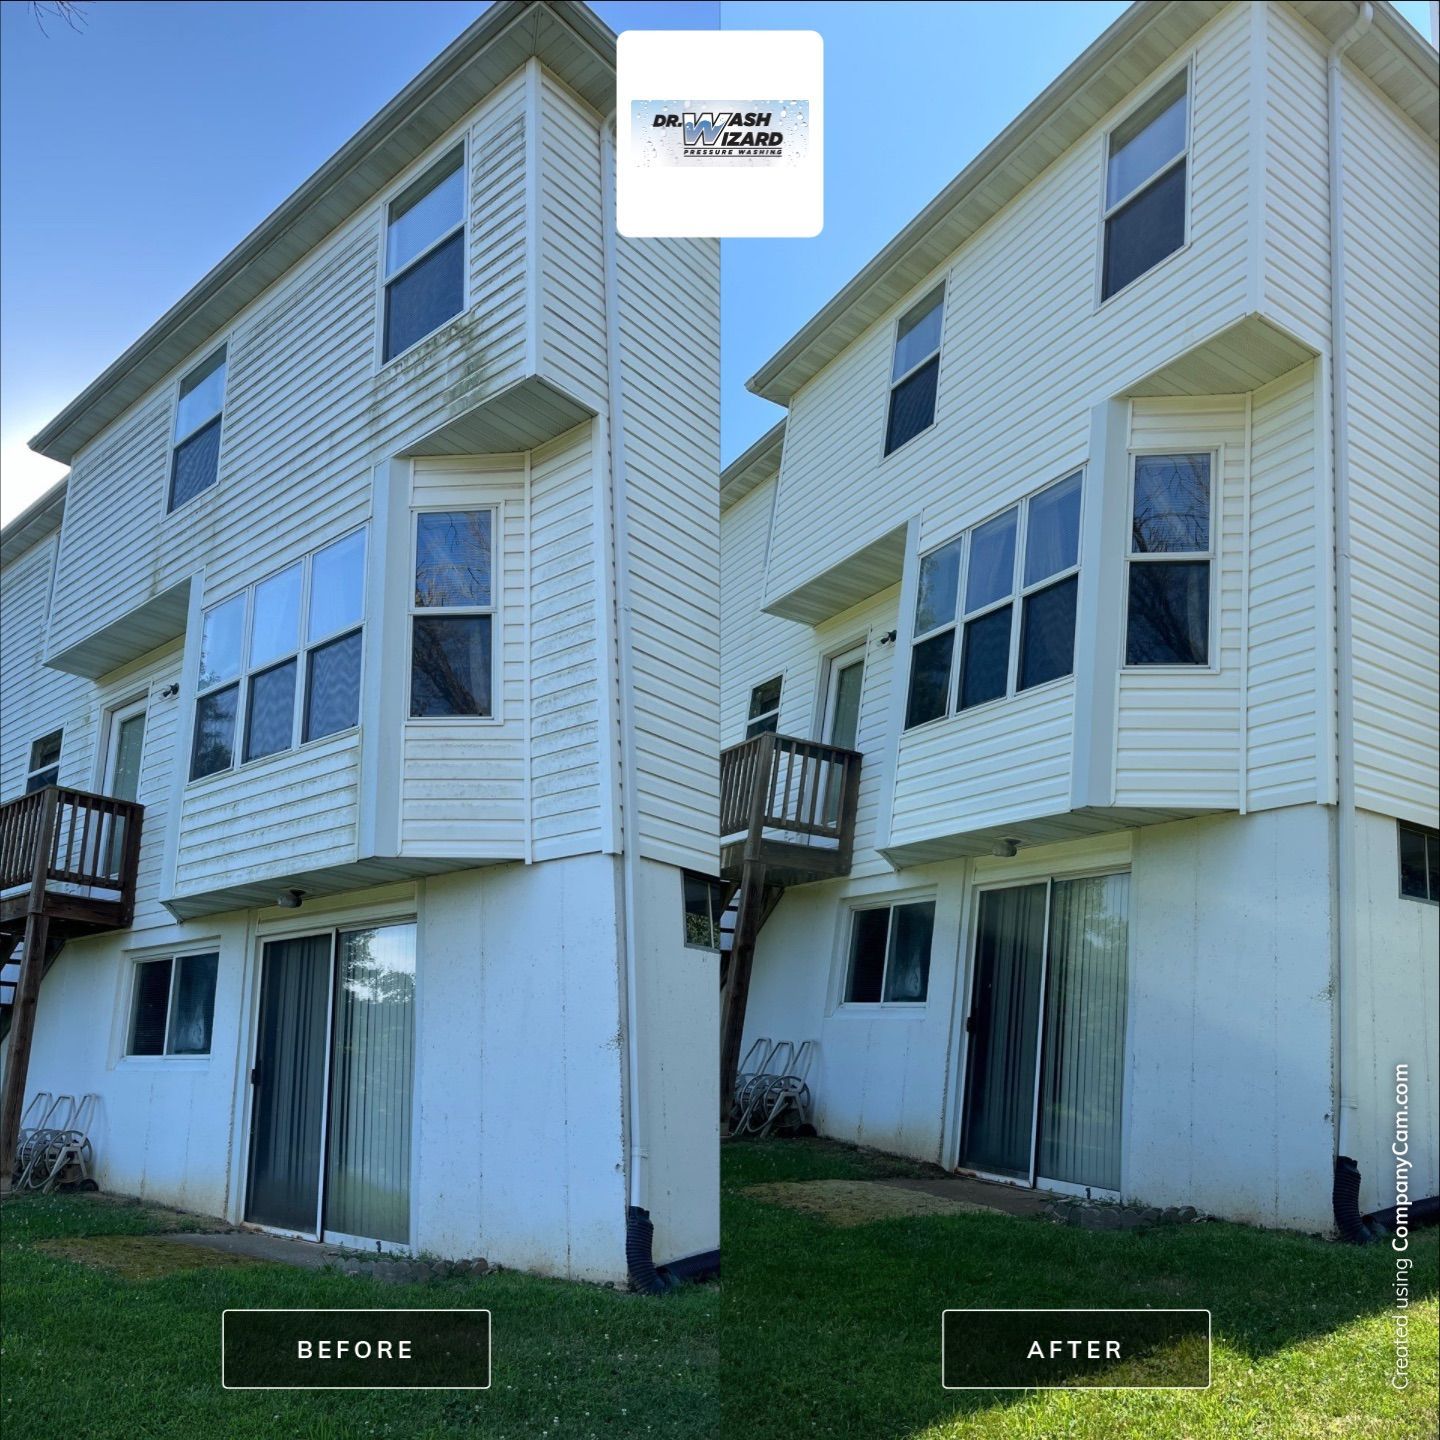 Revive Your Florissant Property's Shine with Dr. Wash Wizard Pressure Washing! Image